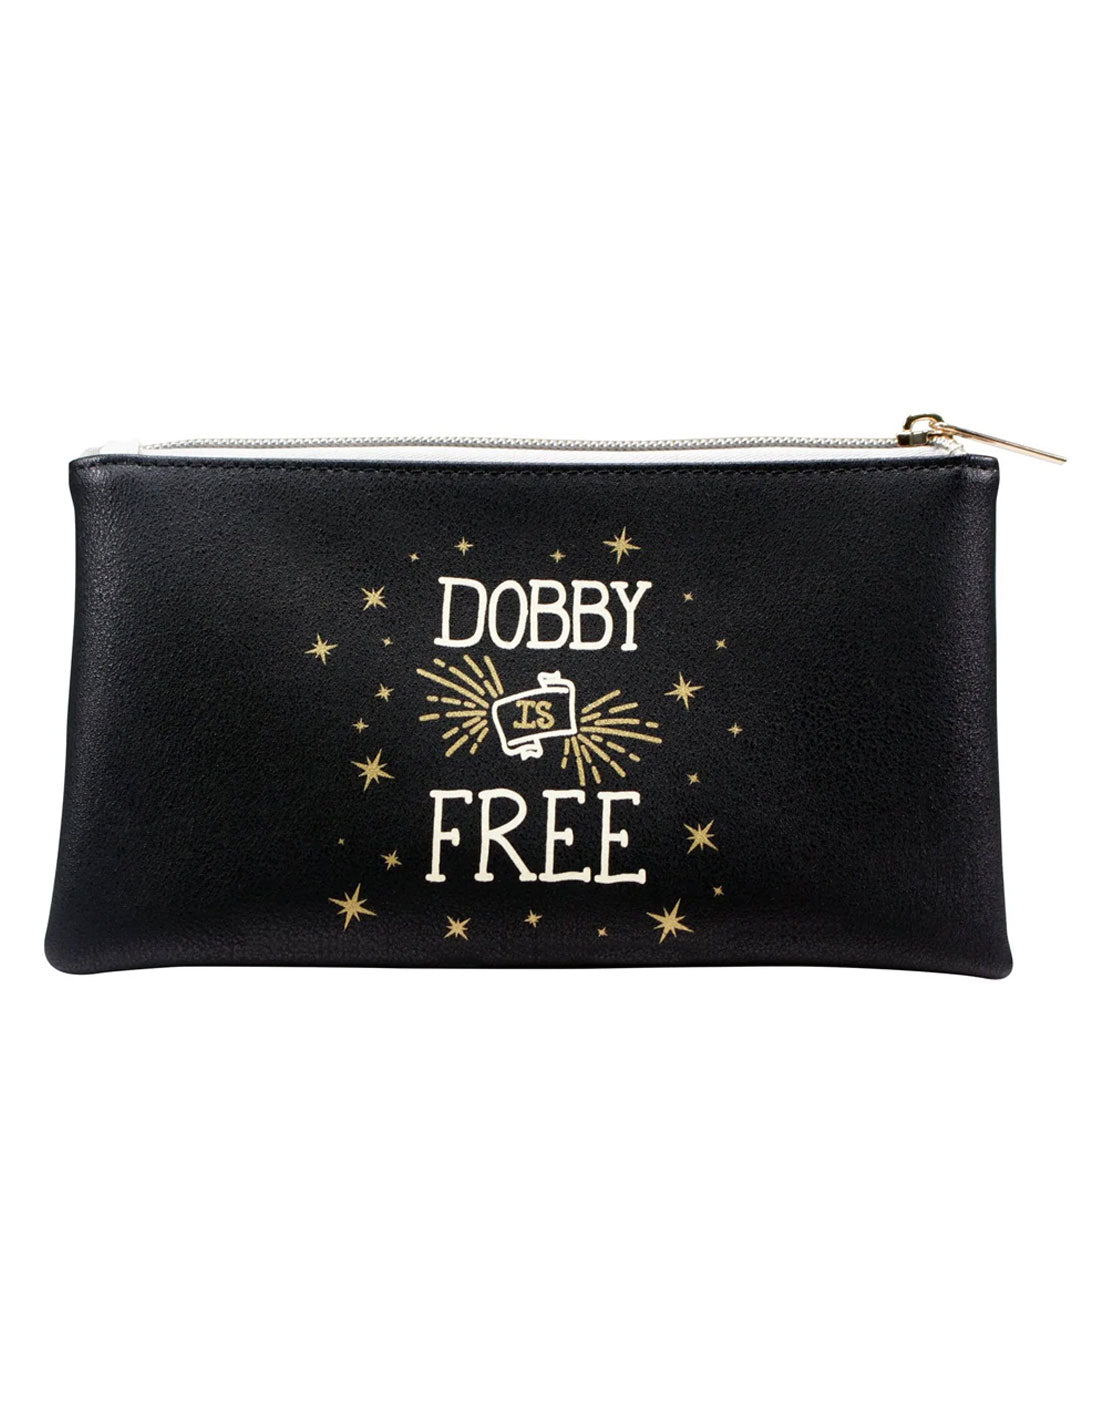 Small Harry Potter pouch - Dobby